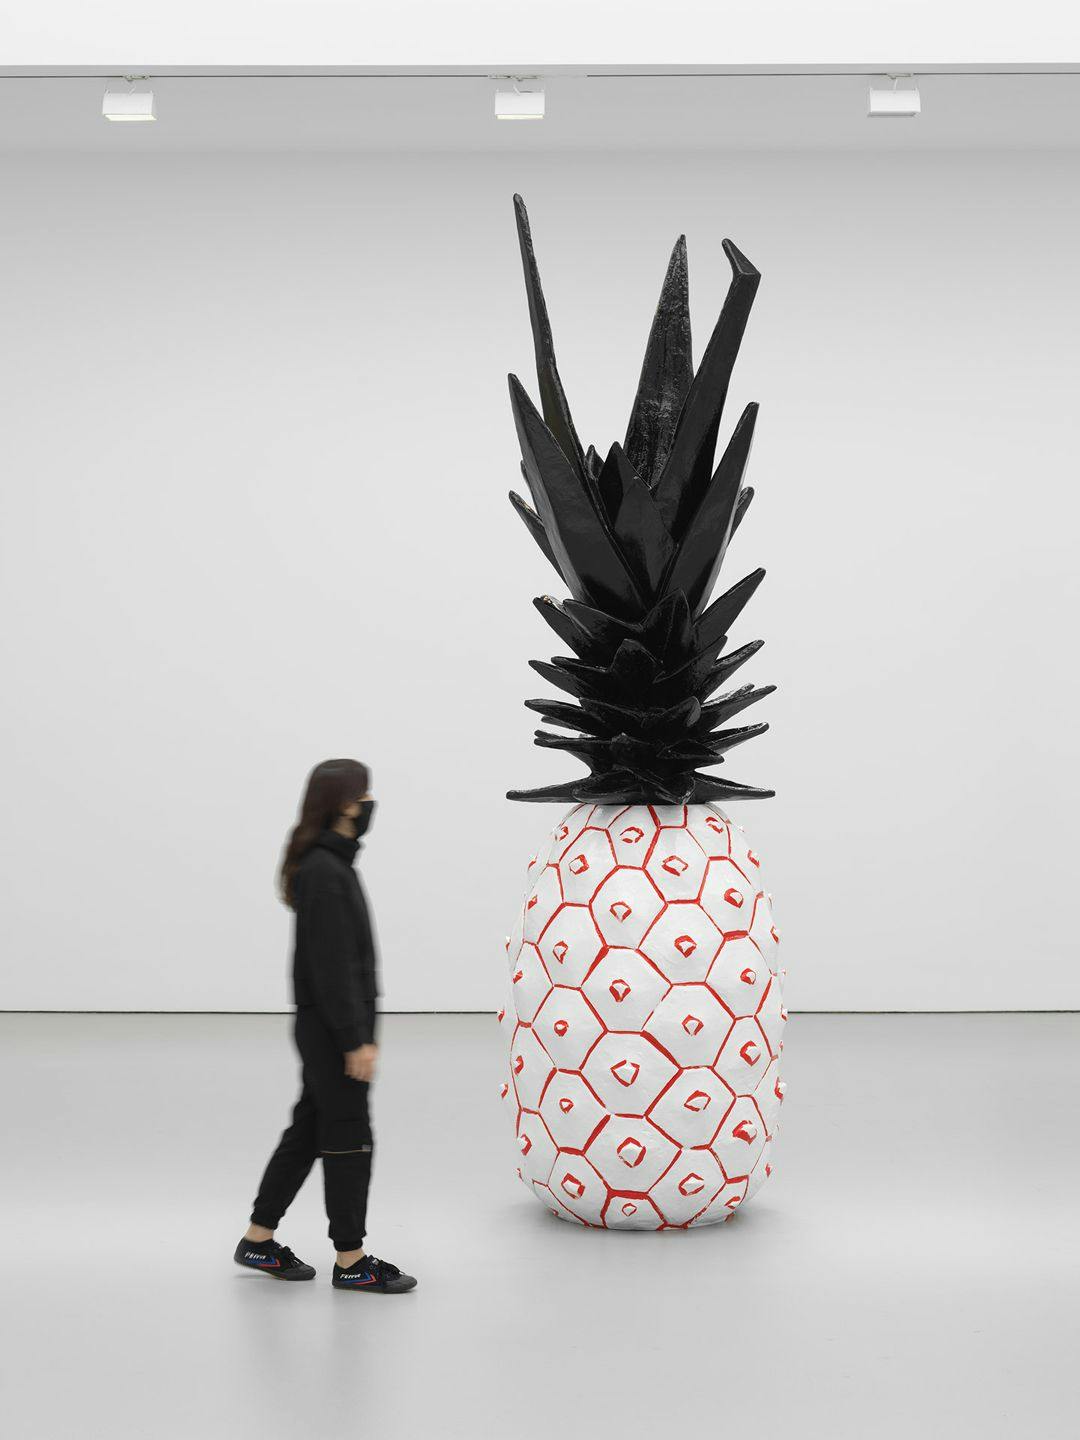 A painted bronze sculpture in two parts by Rose Wylie, titled Pineapple, dated 2020.